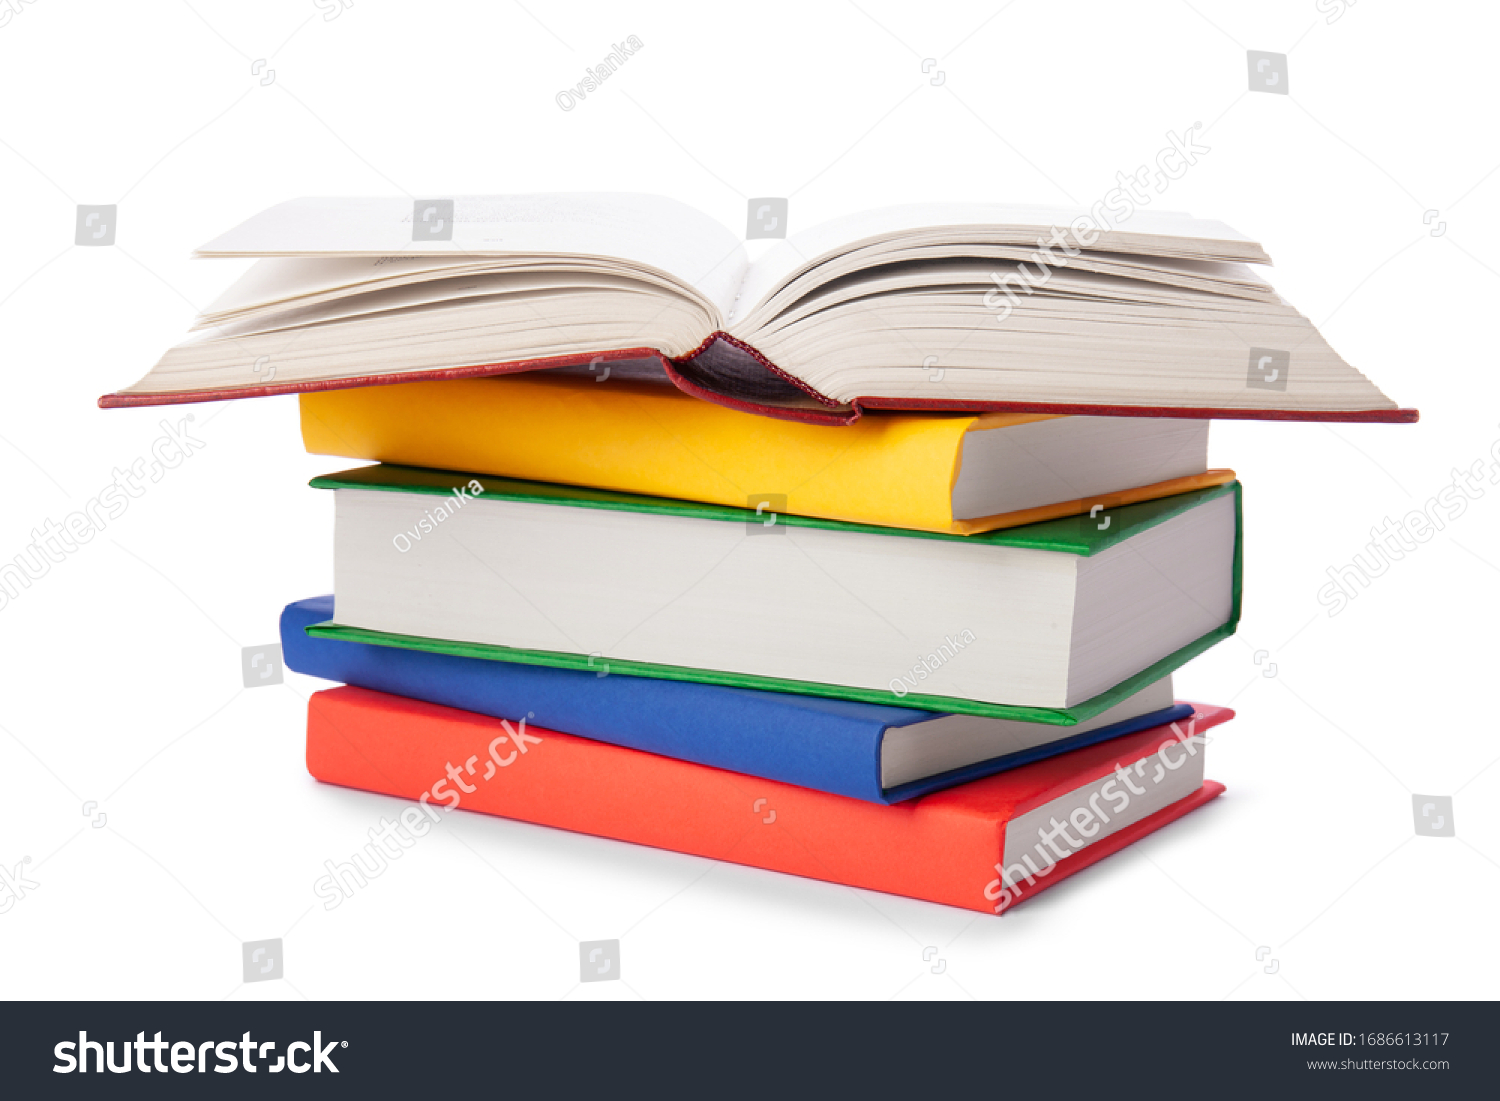 Stack of colorful books isolated on white background. Collection of different books. Hardback books for reading. Back to school and education learning concept #1686613117